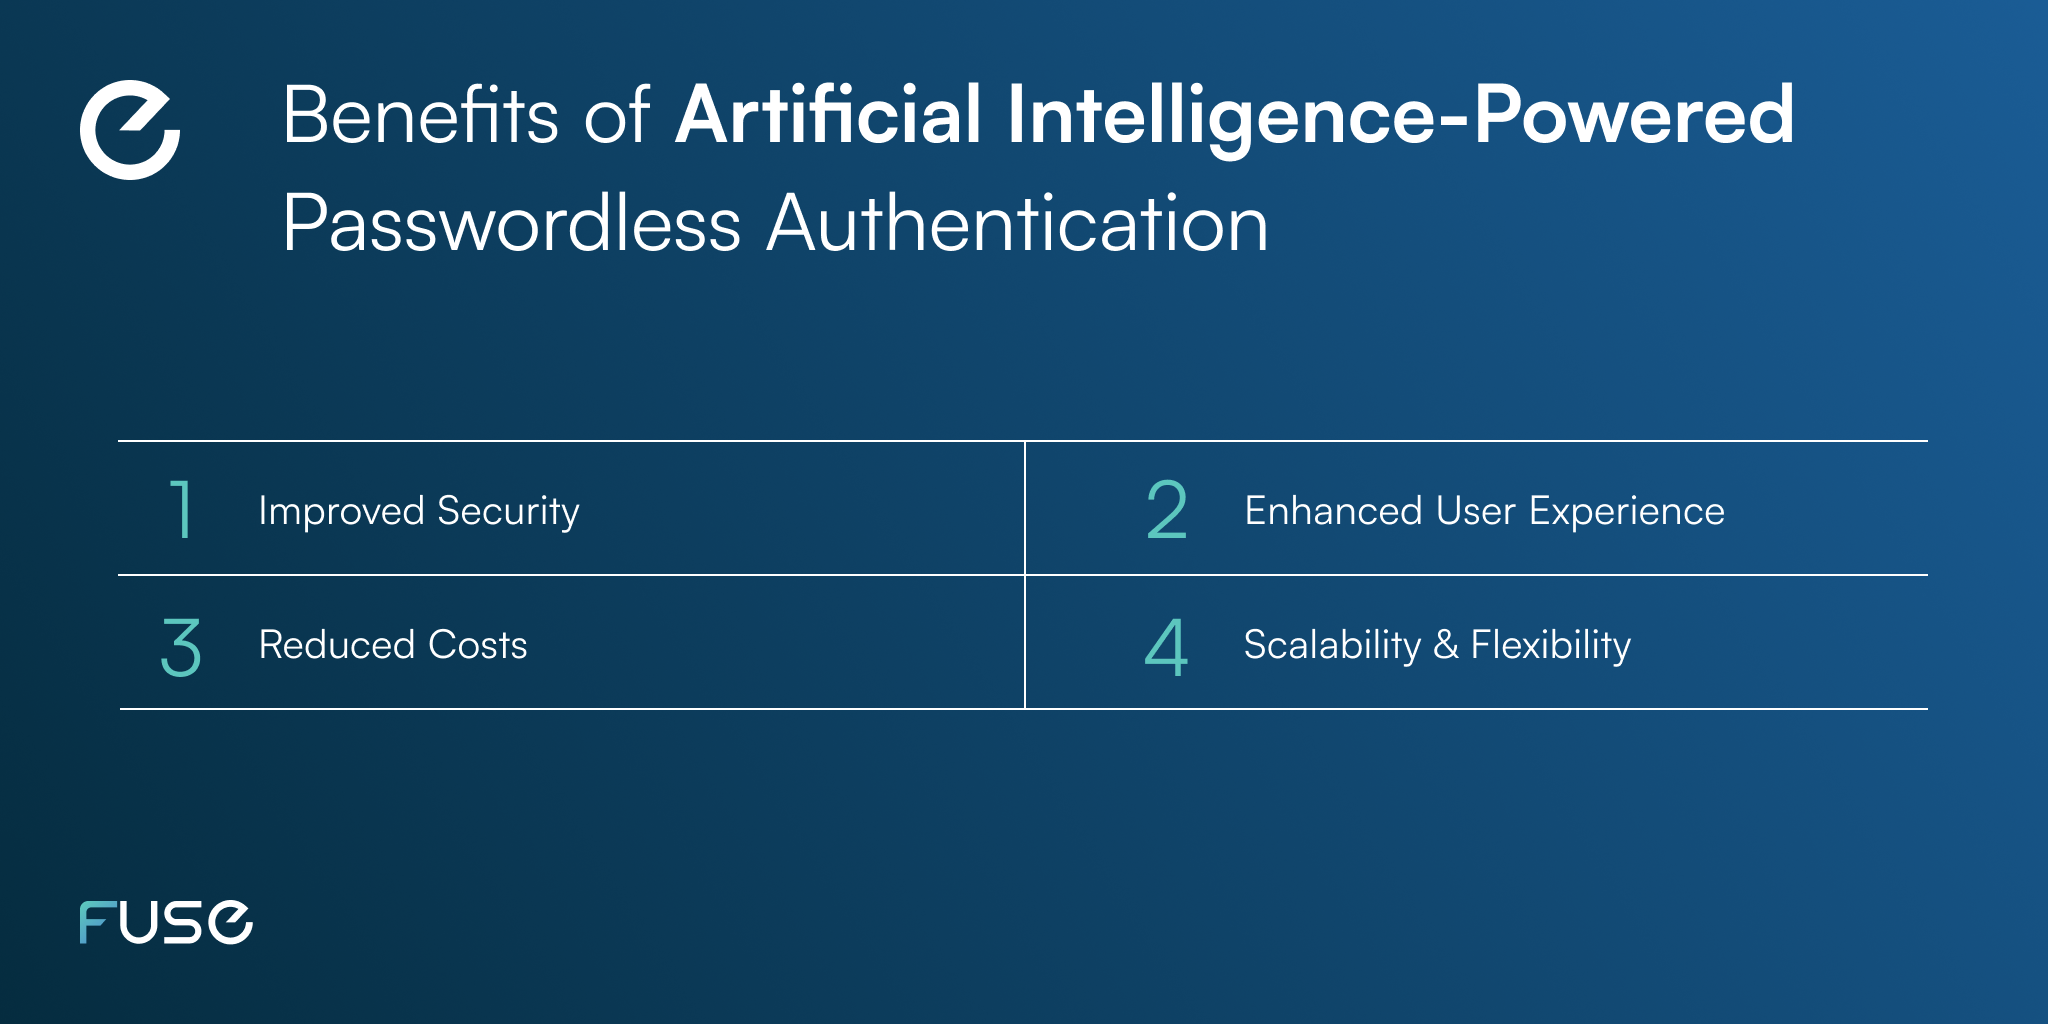 Benefits of Artificial Intelligence-Powered Passwordless Authentication